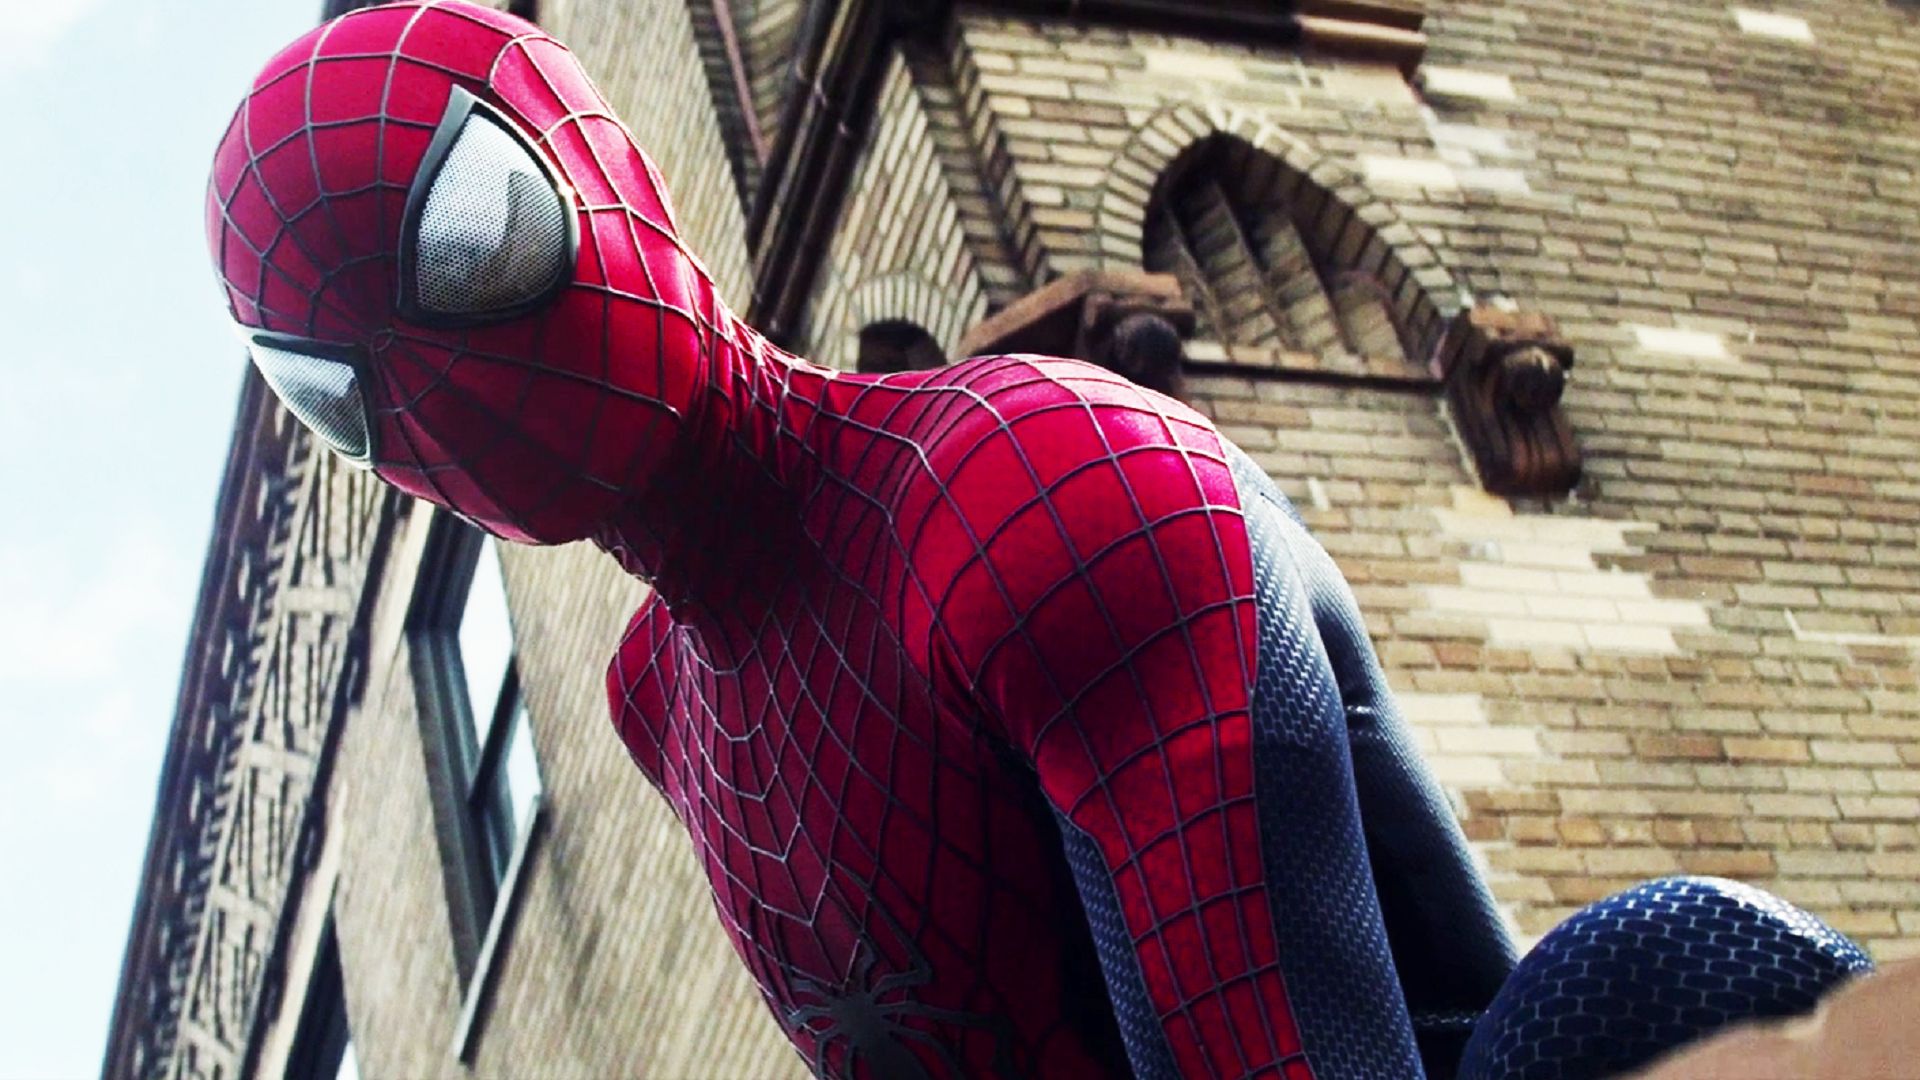 The Amazing SpiderMan 2 Free Wallpaper download  Download Free The  Amazing SpiderMan 2 HD Wallpapers to your mobile phone or tablet